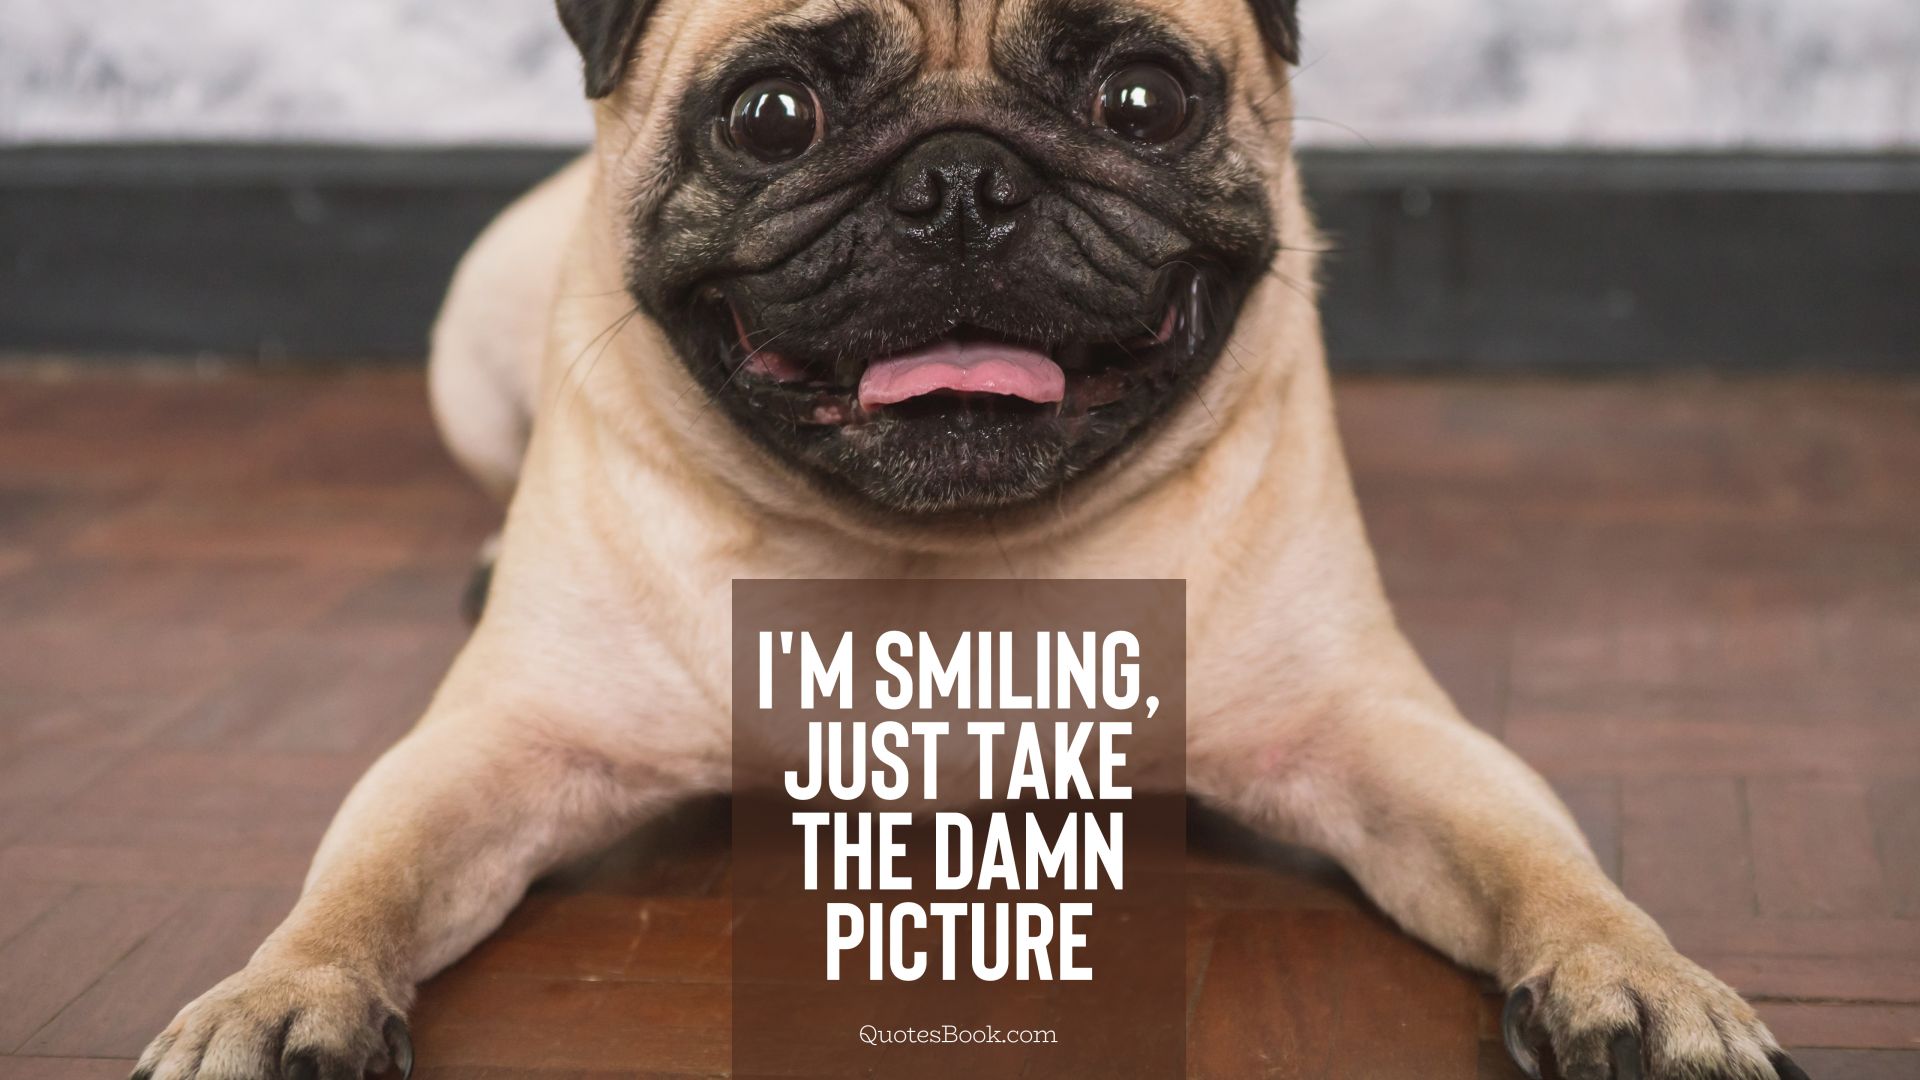 I'm smiling, just take the damn picture - Page 2 - QuotesBook